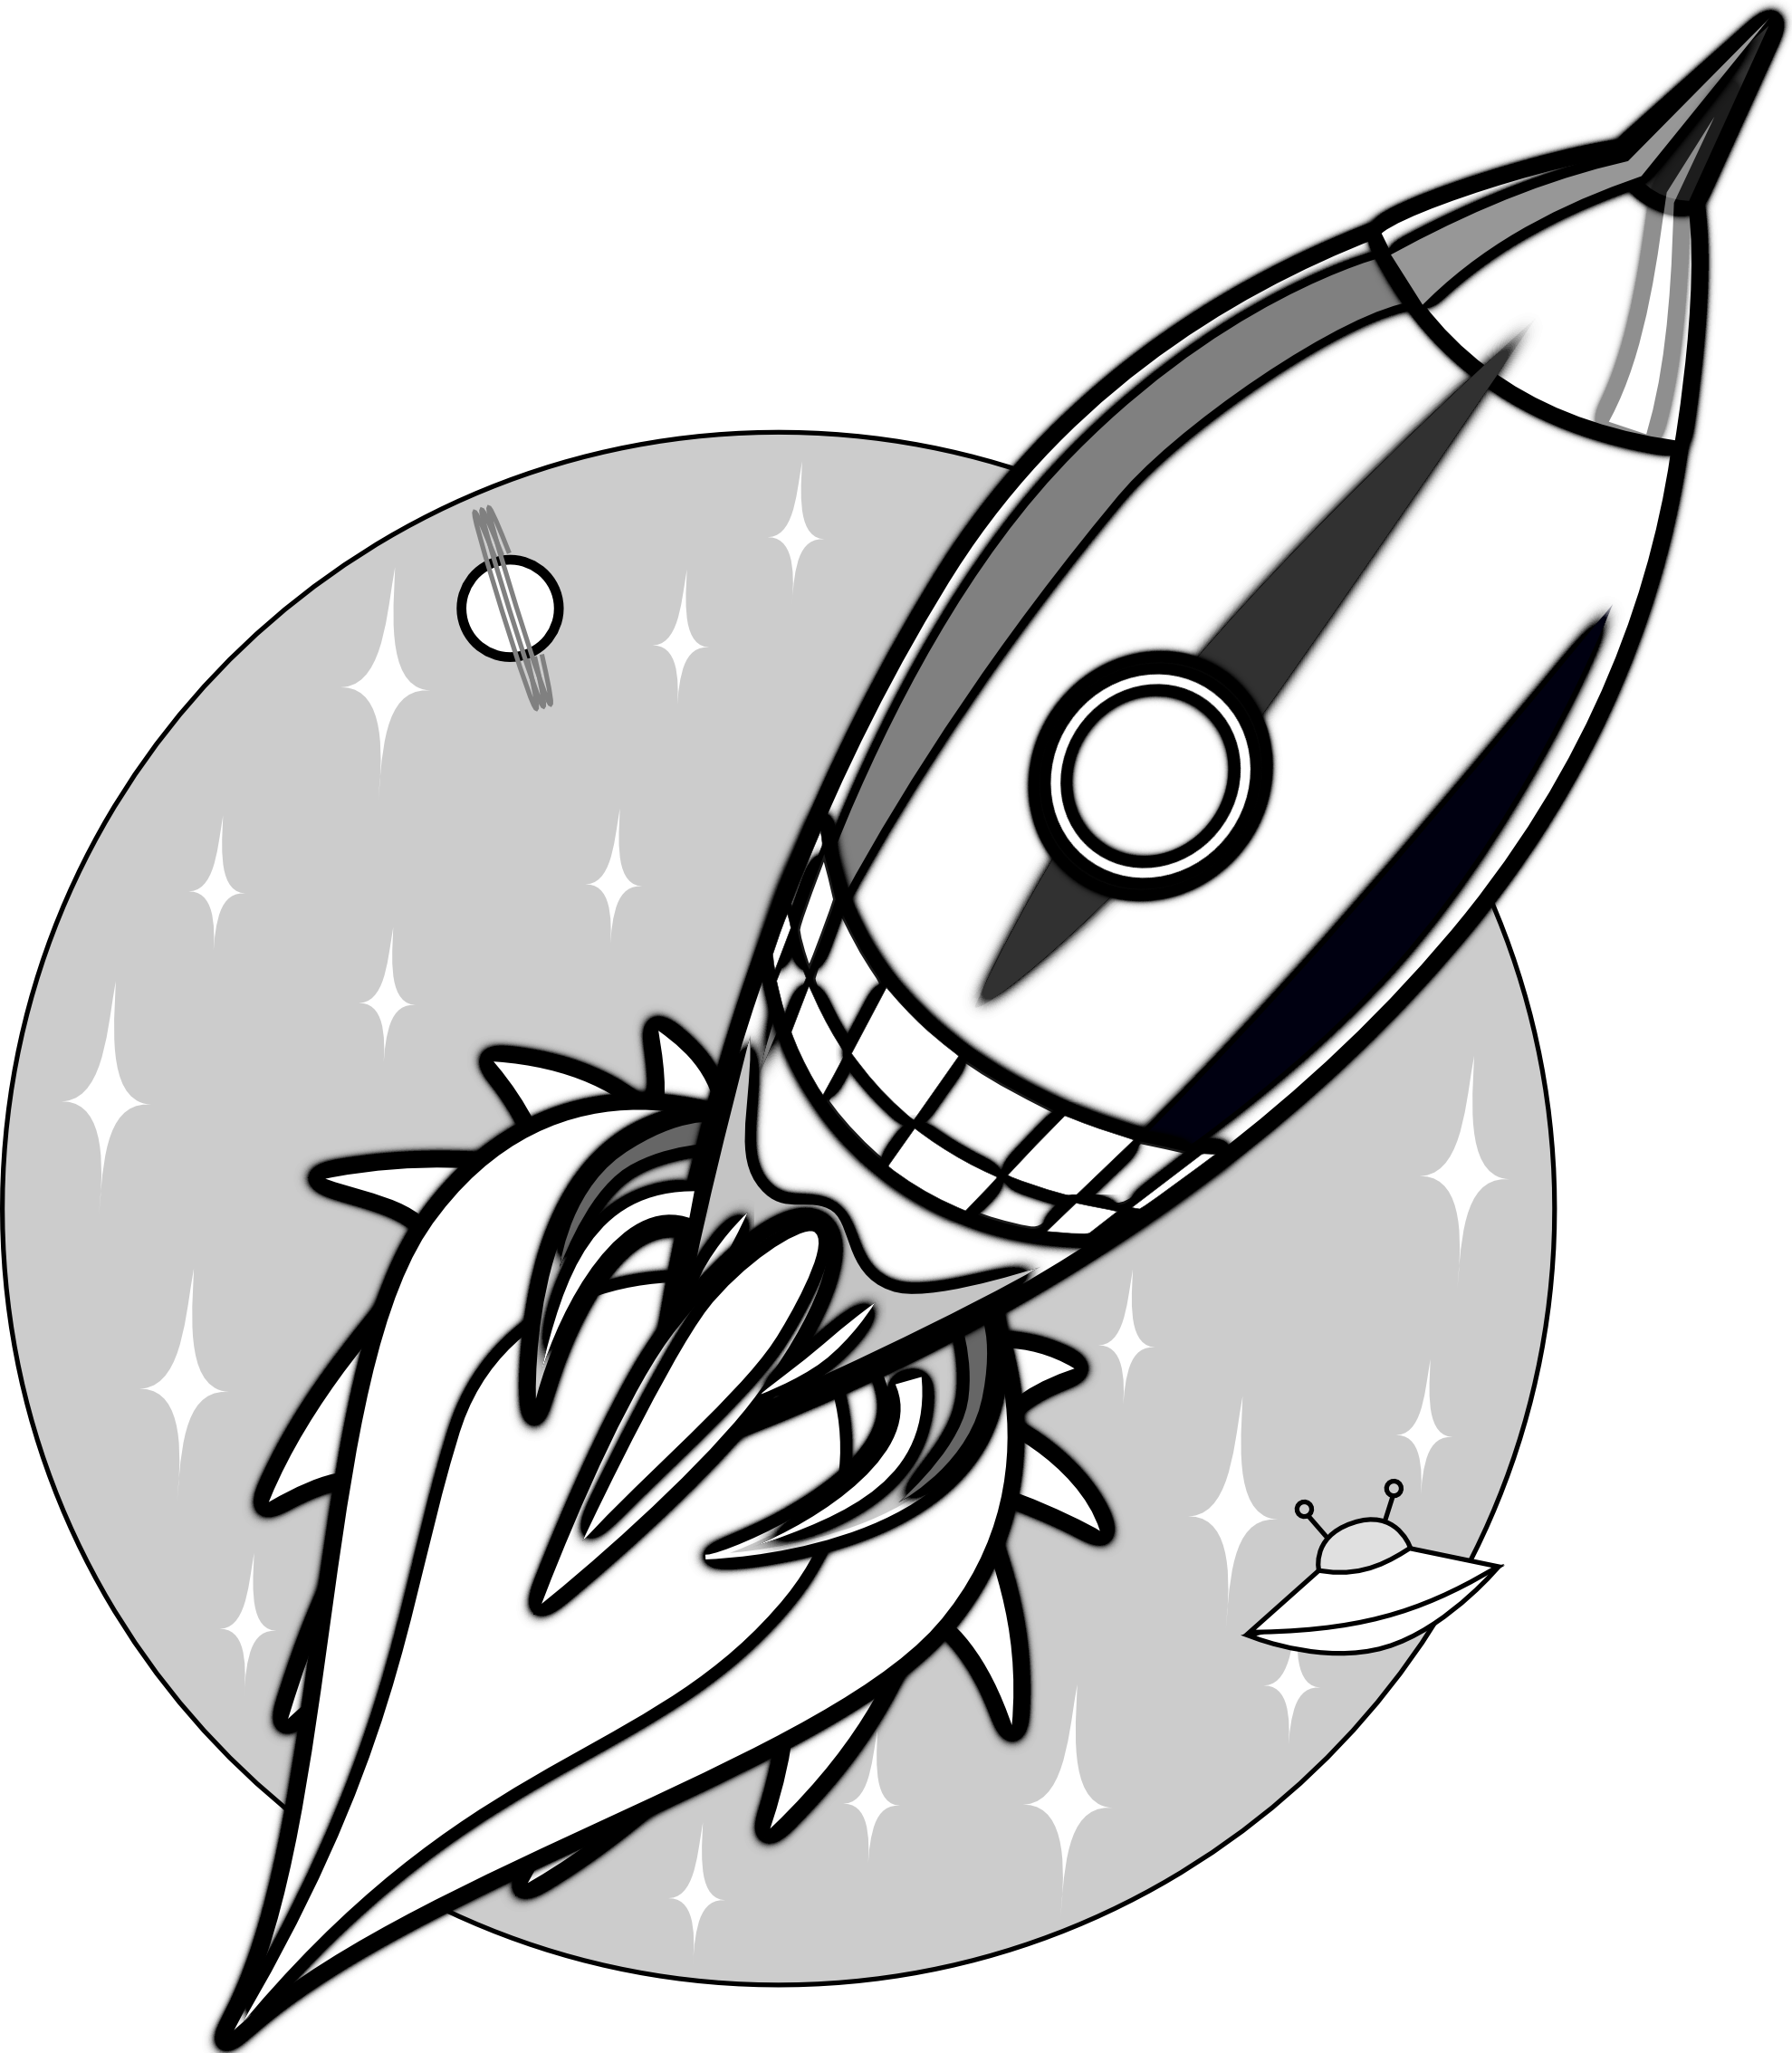 Rocket Clipart Black And White   Clipart Panda   Free Clipart Images